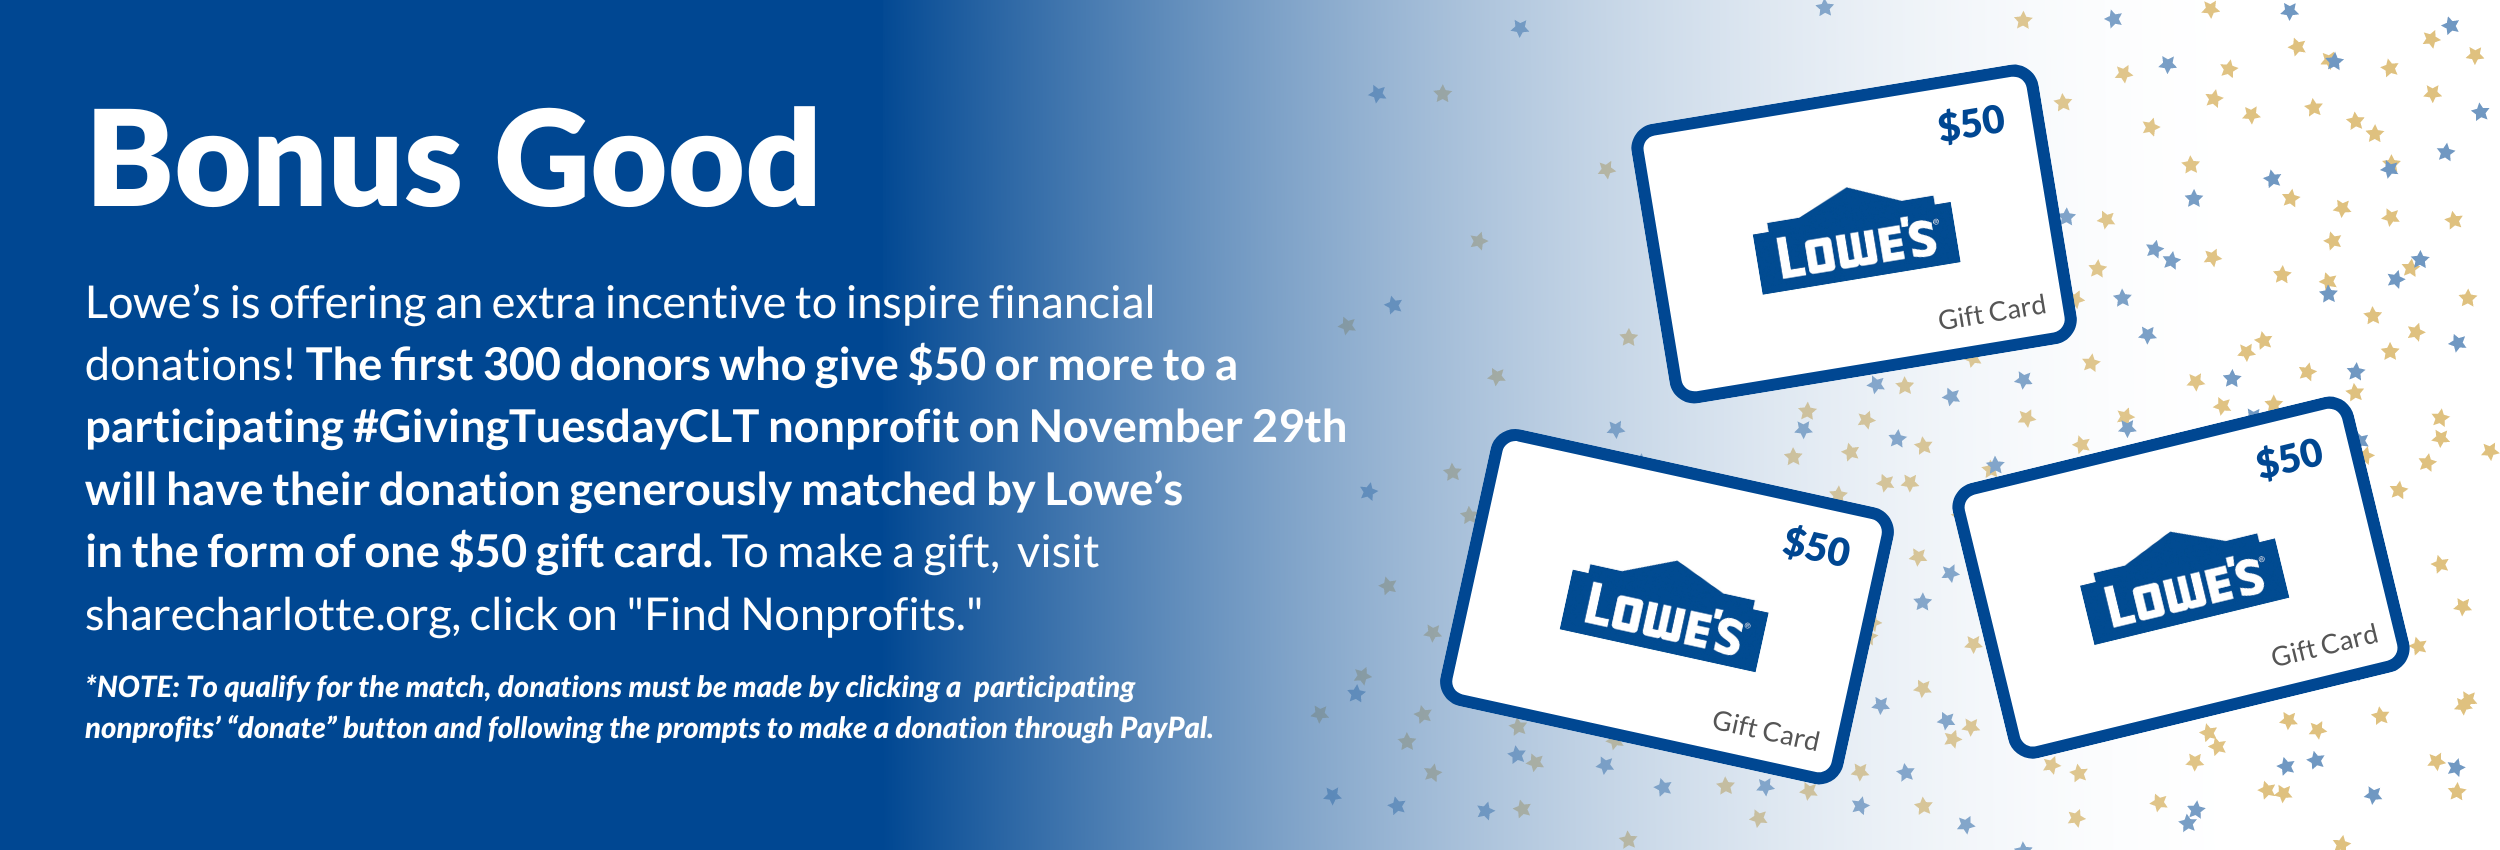 Bonus Good: the first 300 donors who give $50 or more to a participating nonprofit on Nov 29th will have their donation generously matched by Lowe's in the form of one $50 gift card.